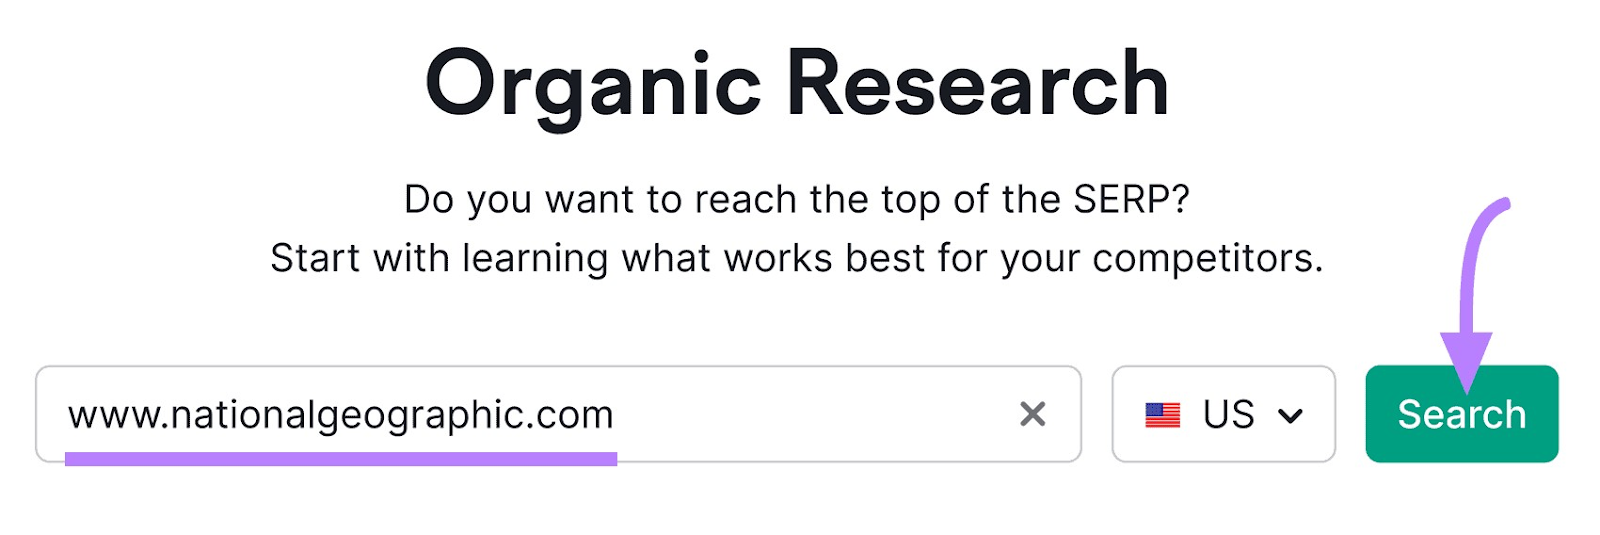 "www.nationalgeographic.com" entered into the Organic Research search bar